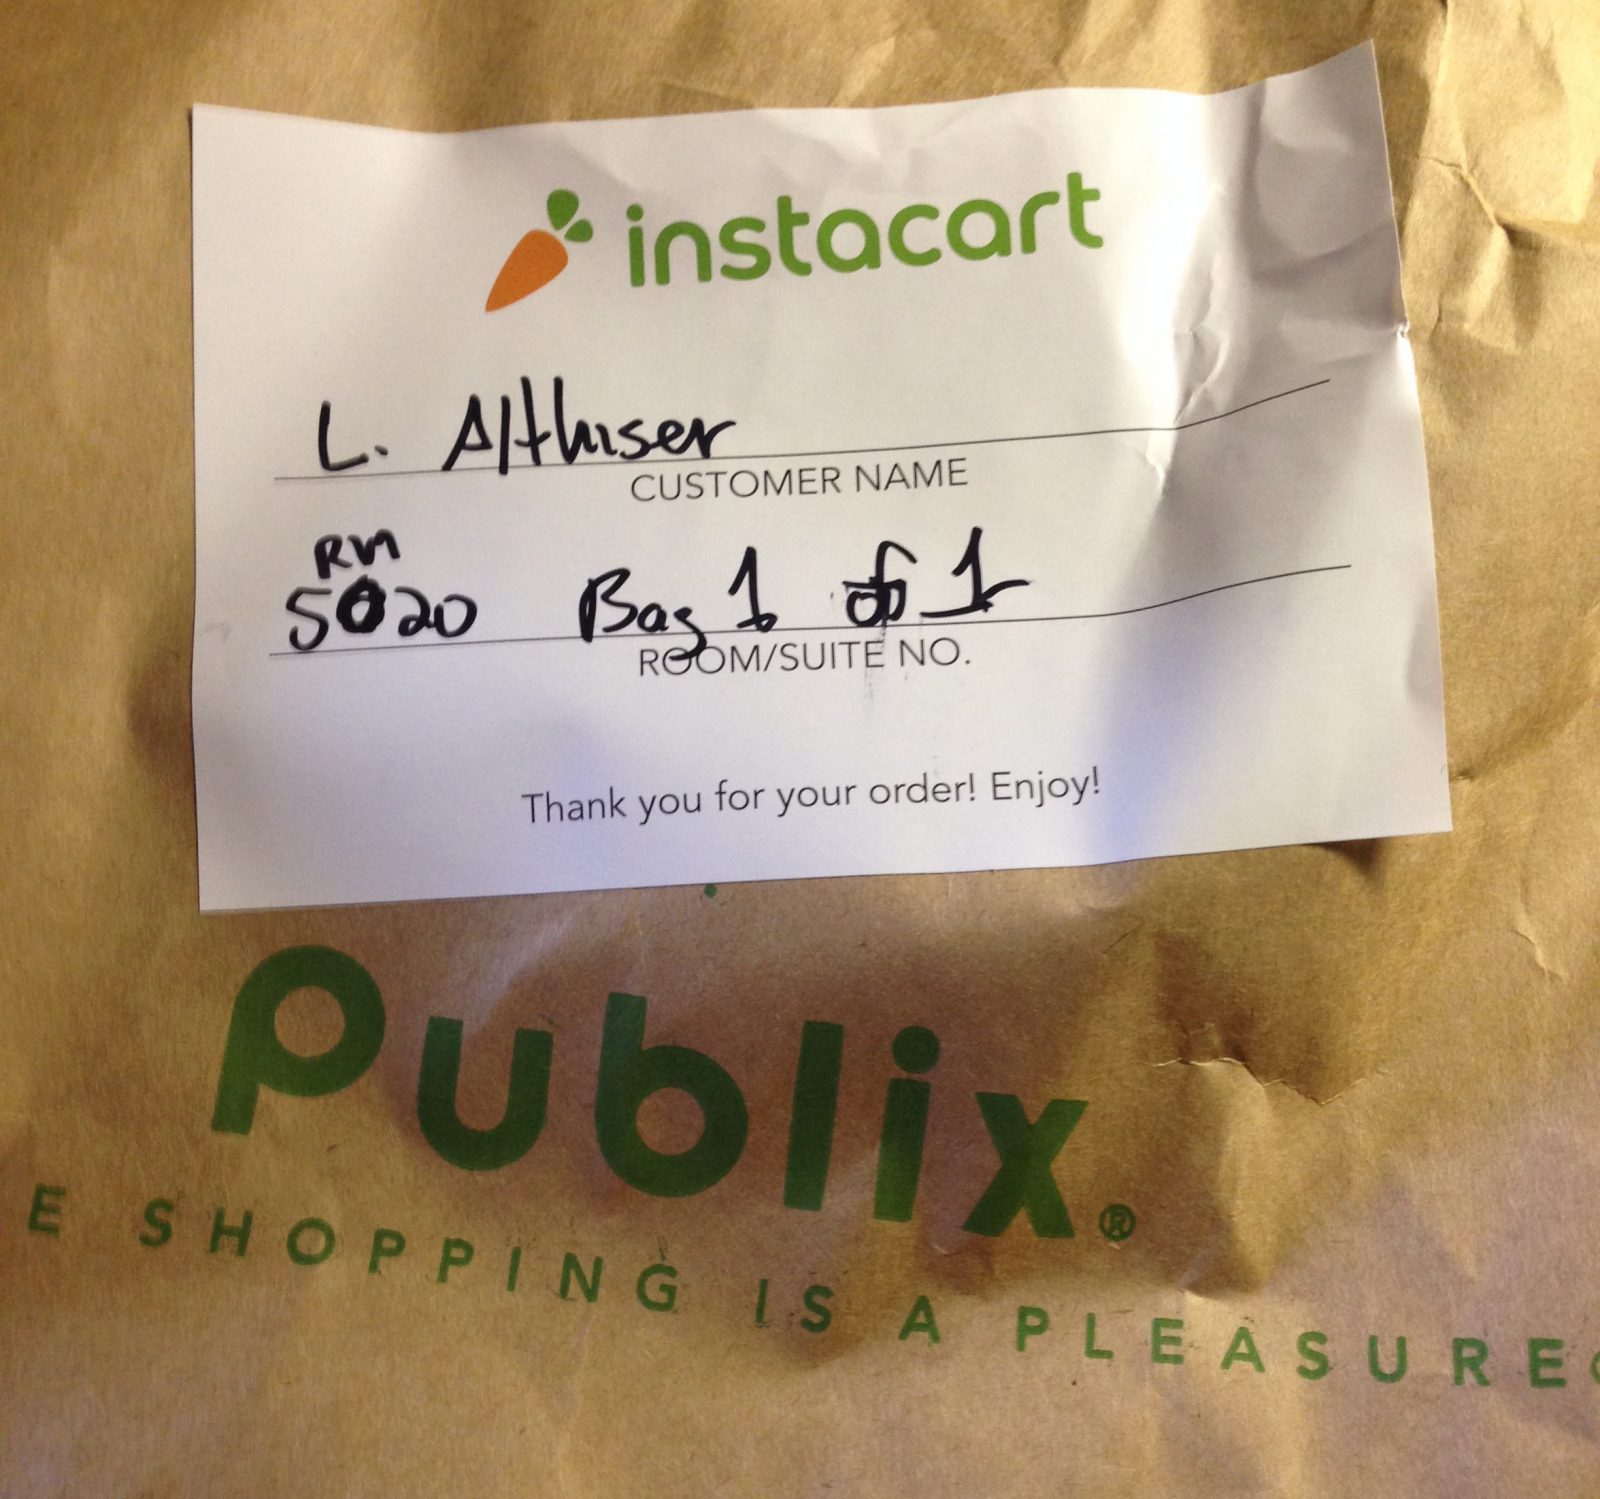 Does Instacart Deliver to Hotels